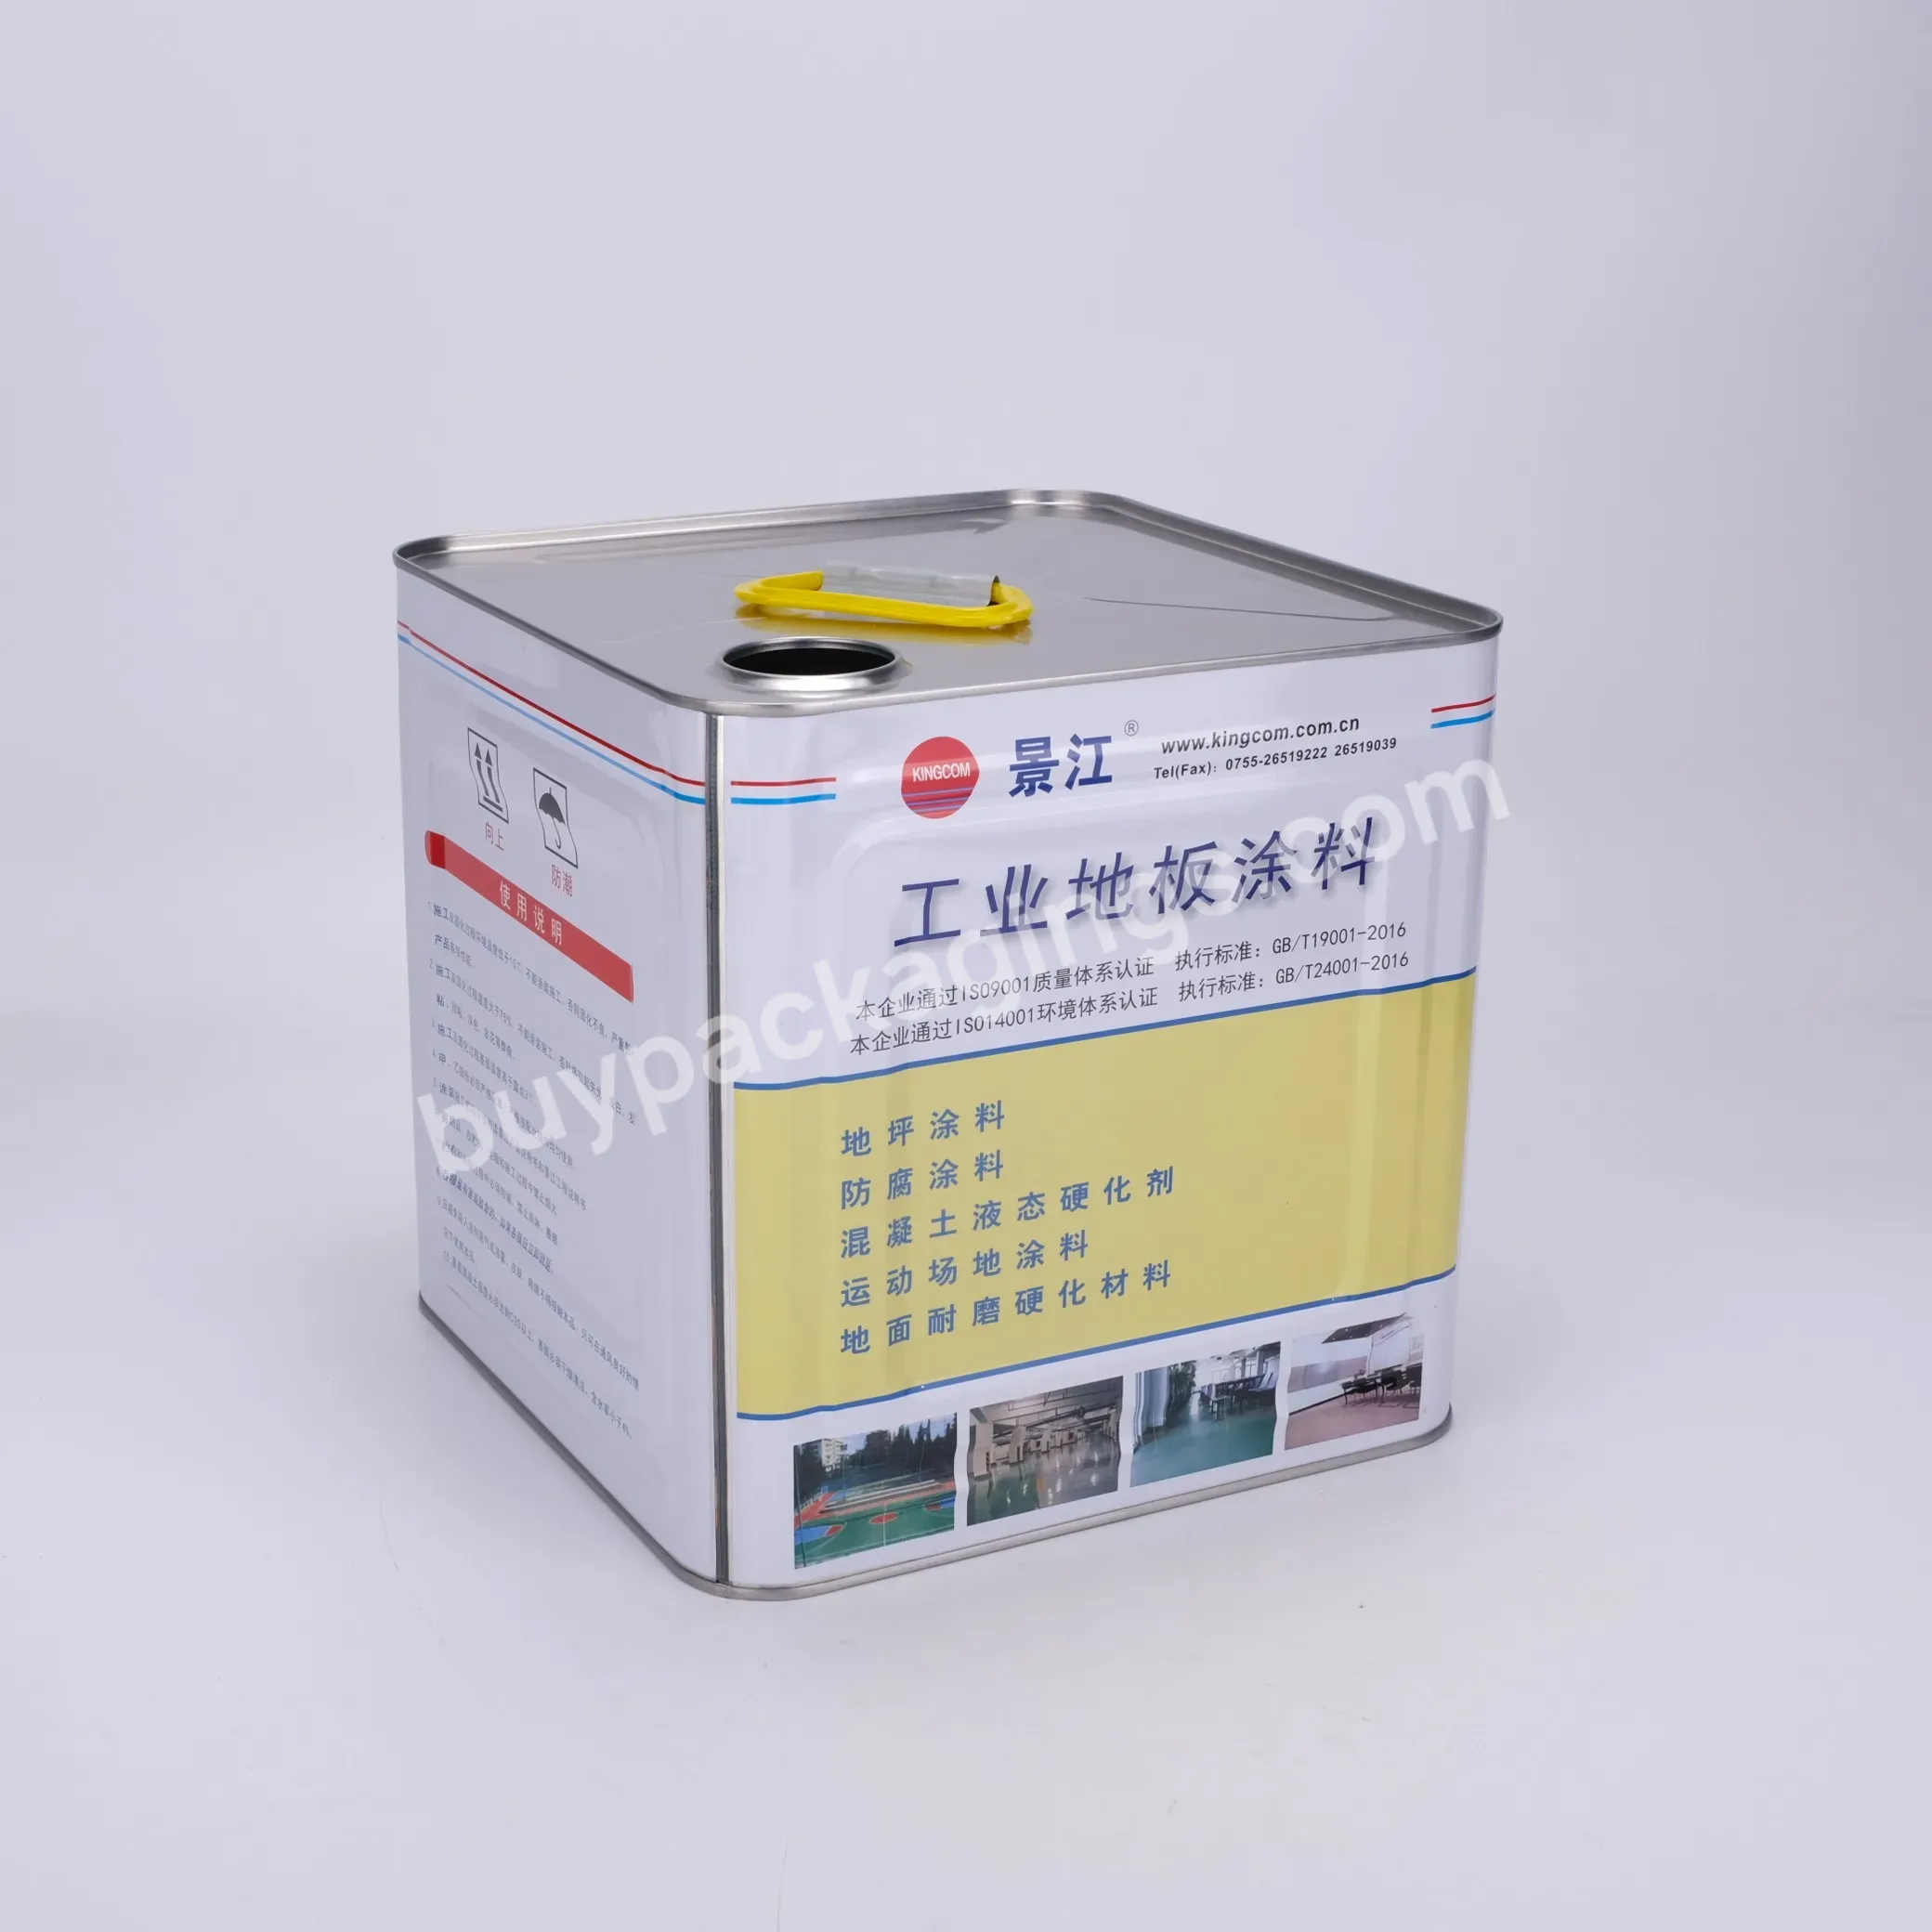 10 Liter Meta Container Square Tin Can For Glue Oil With Plastic Lid - Buy 10 Liter Square Oil Tin Can,10 Litre Metal Container,Tin Can For Glue Oil.